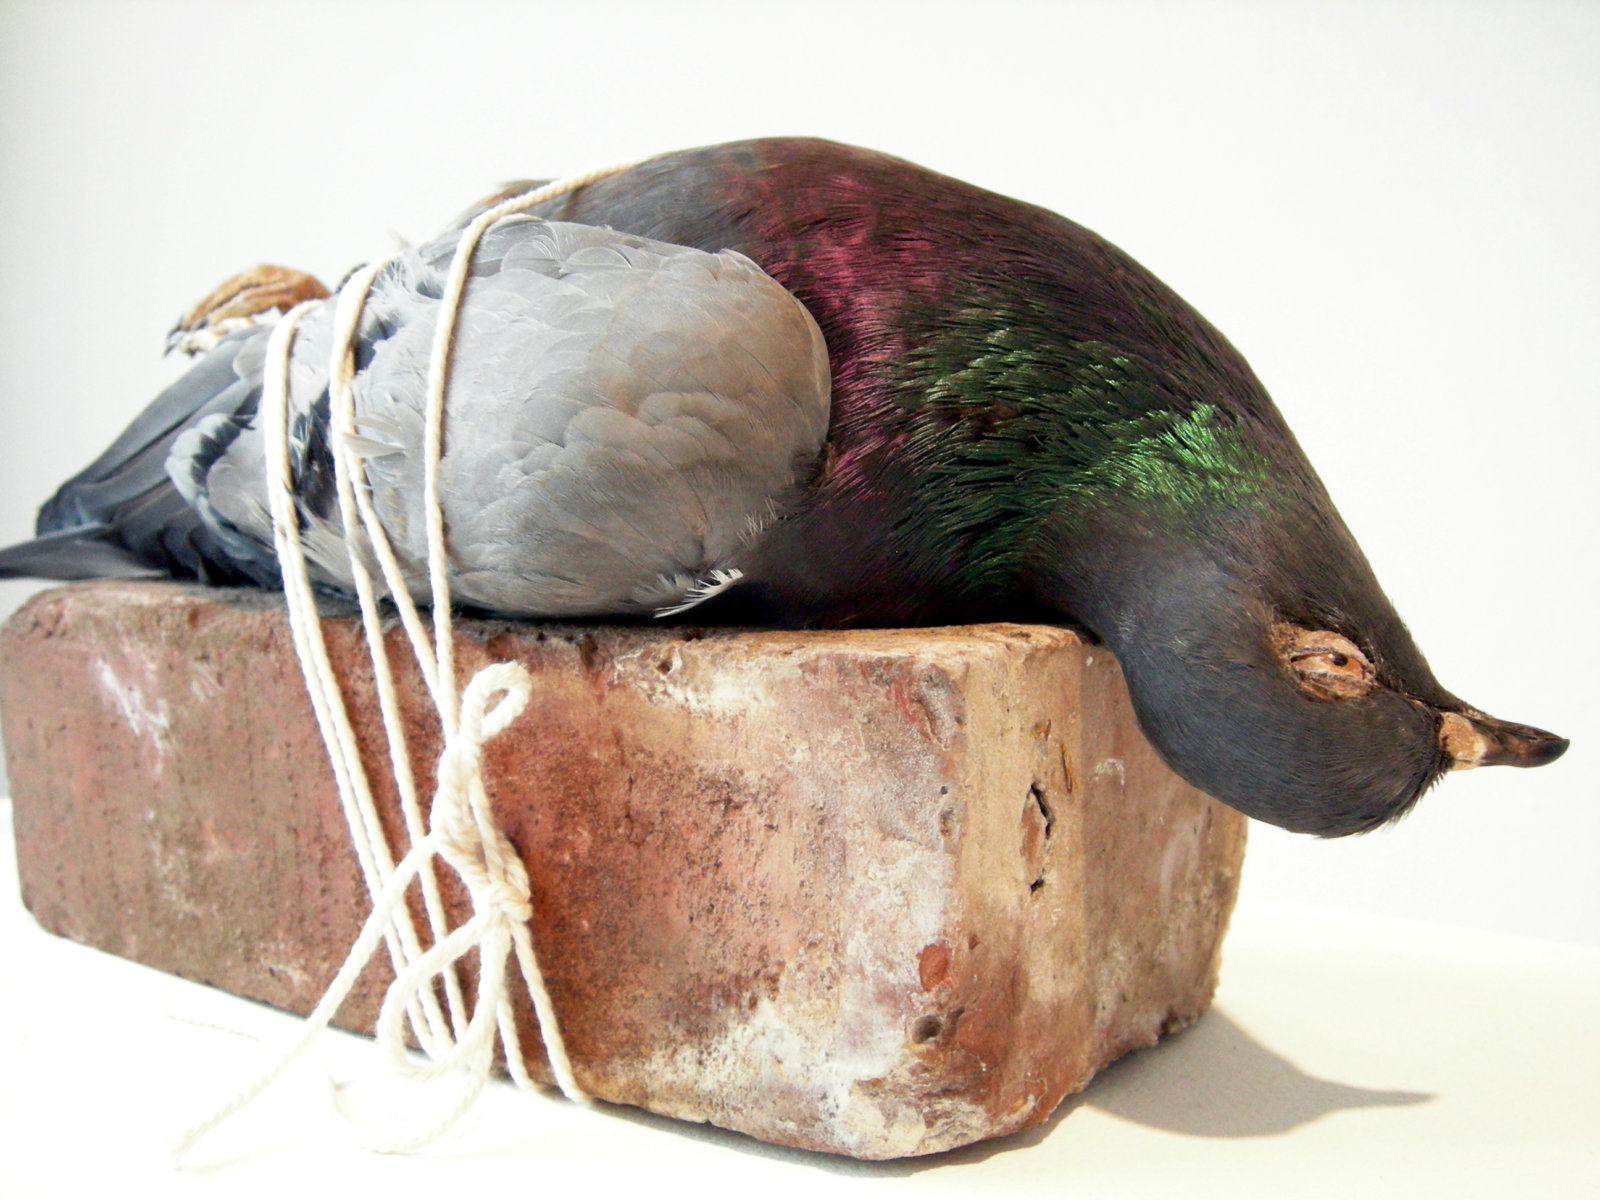 Abbas Akhavan, Correspondences (detail), 2007, taxidermy pigeon, brick, string, letter carrier and letter, glass bottle, oil, gasoline, electric tape, cloth, letter, postcard, dimensions variable